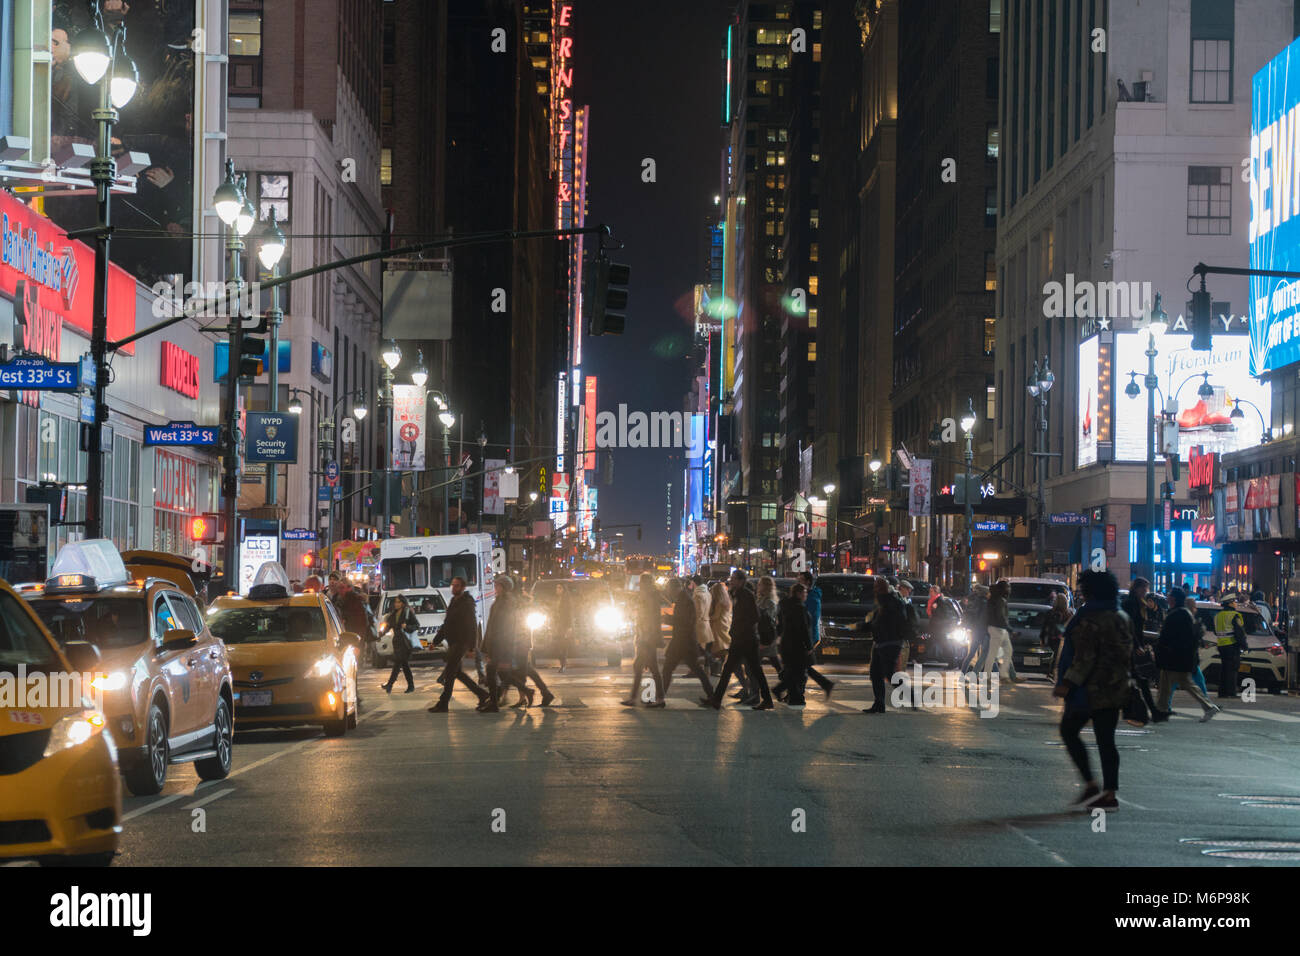 New York City, Circa 2017: Night time wide angle view of midtown Manhattan NYC crosswalk during rush hour. People walk safely across avenue intersecti Stock Photo